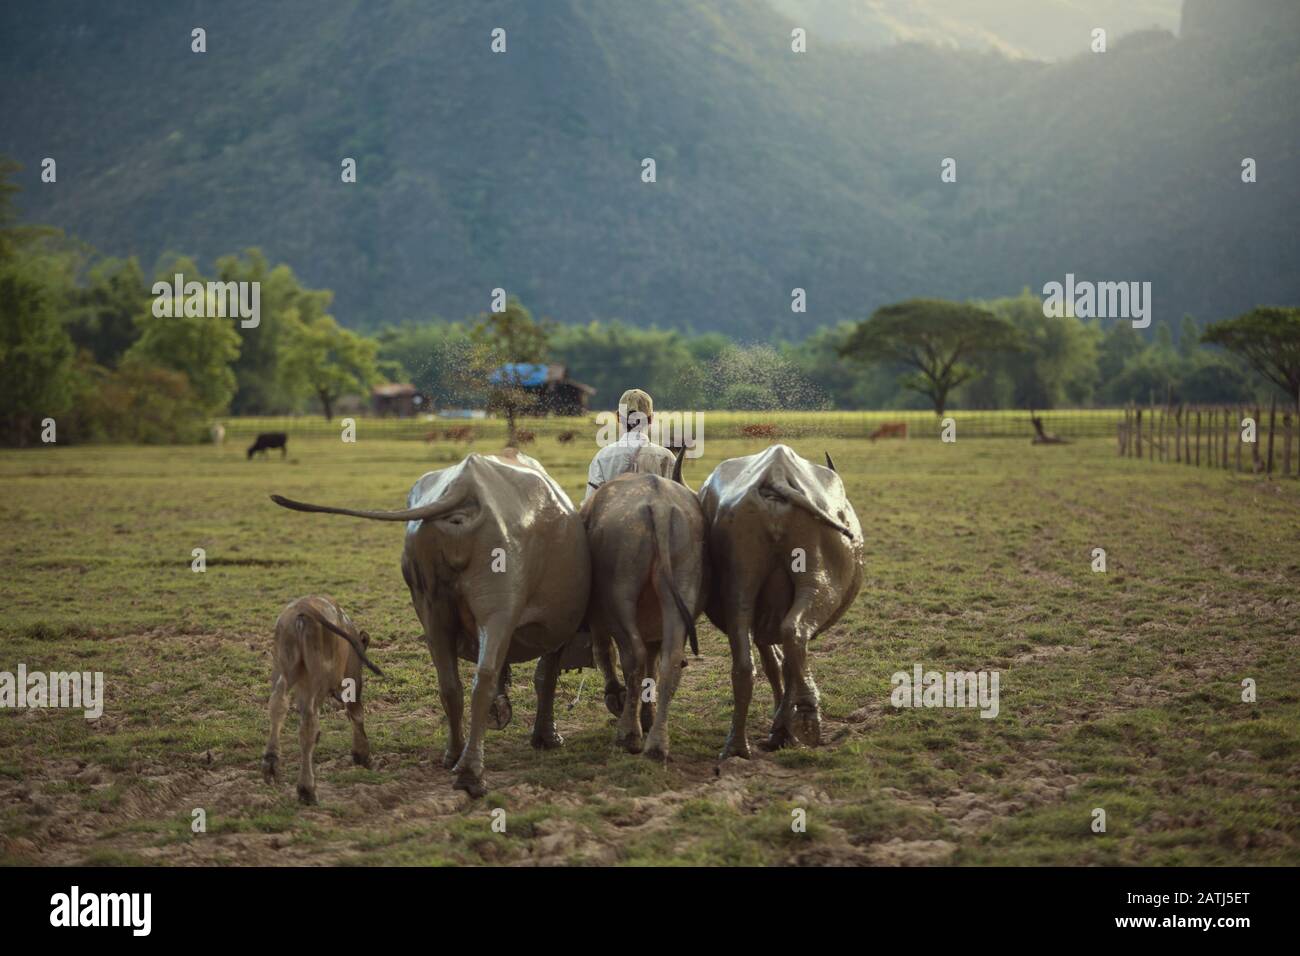 The farmer and buffaloes go home together with life in rural Laos. Stock Photo